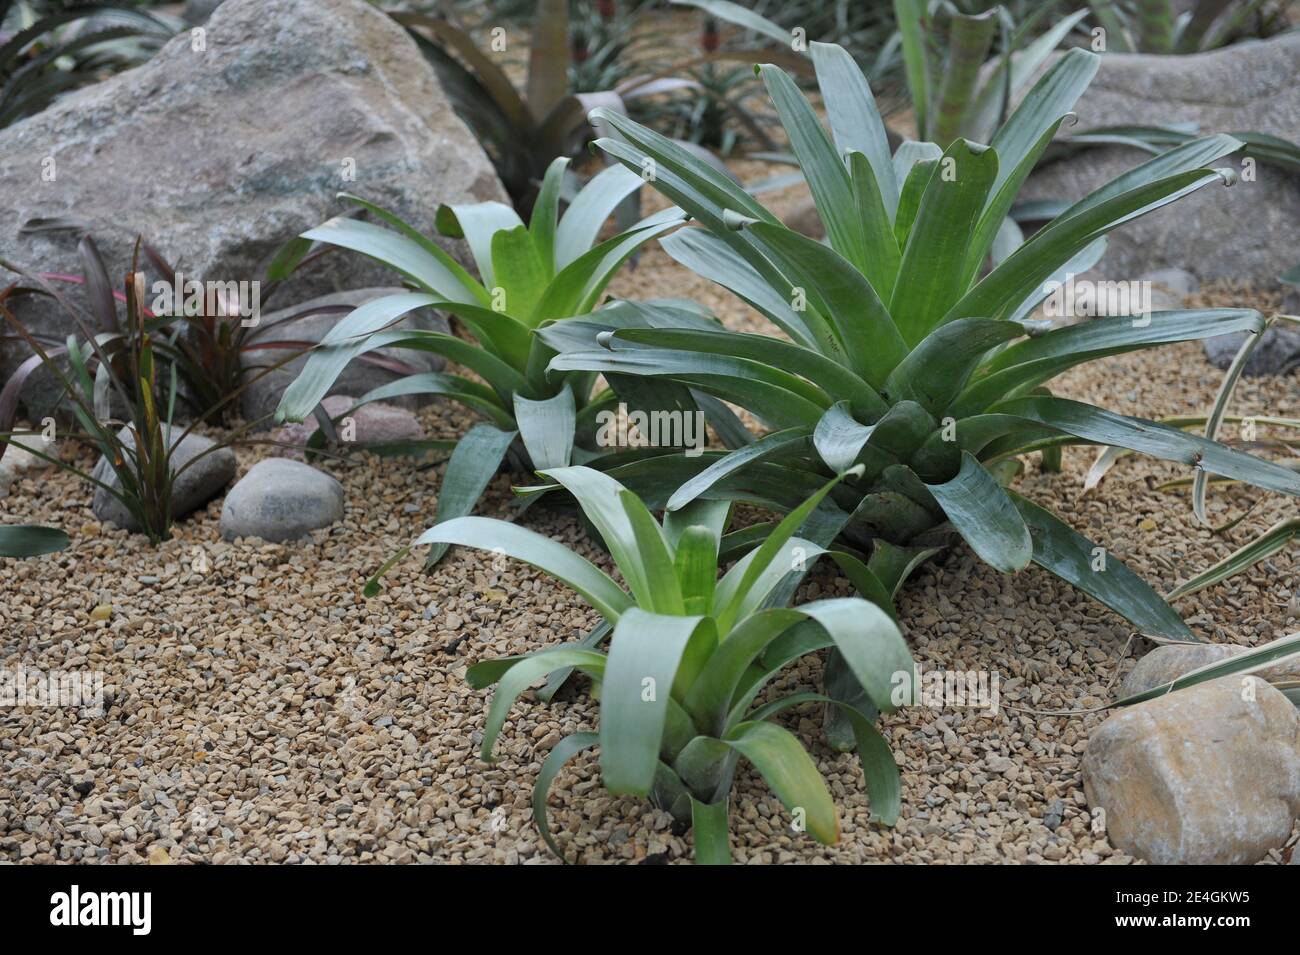 Urn plant (Silver vase plant, Aechmea fasciata) with grey leaves grows in a gravel garden in a greenhouse Stock Photo